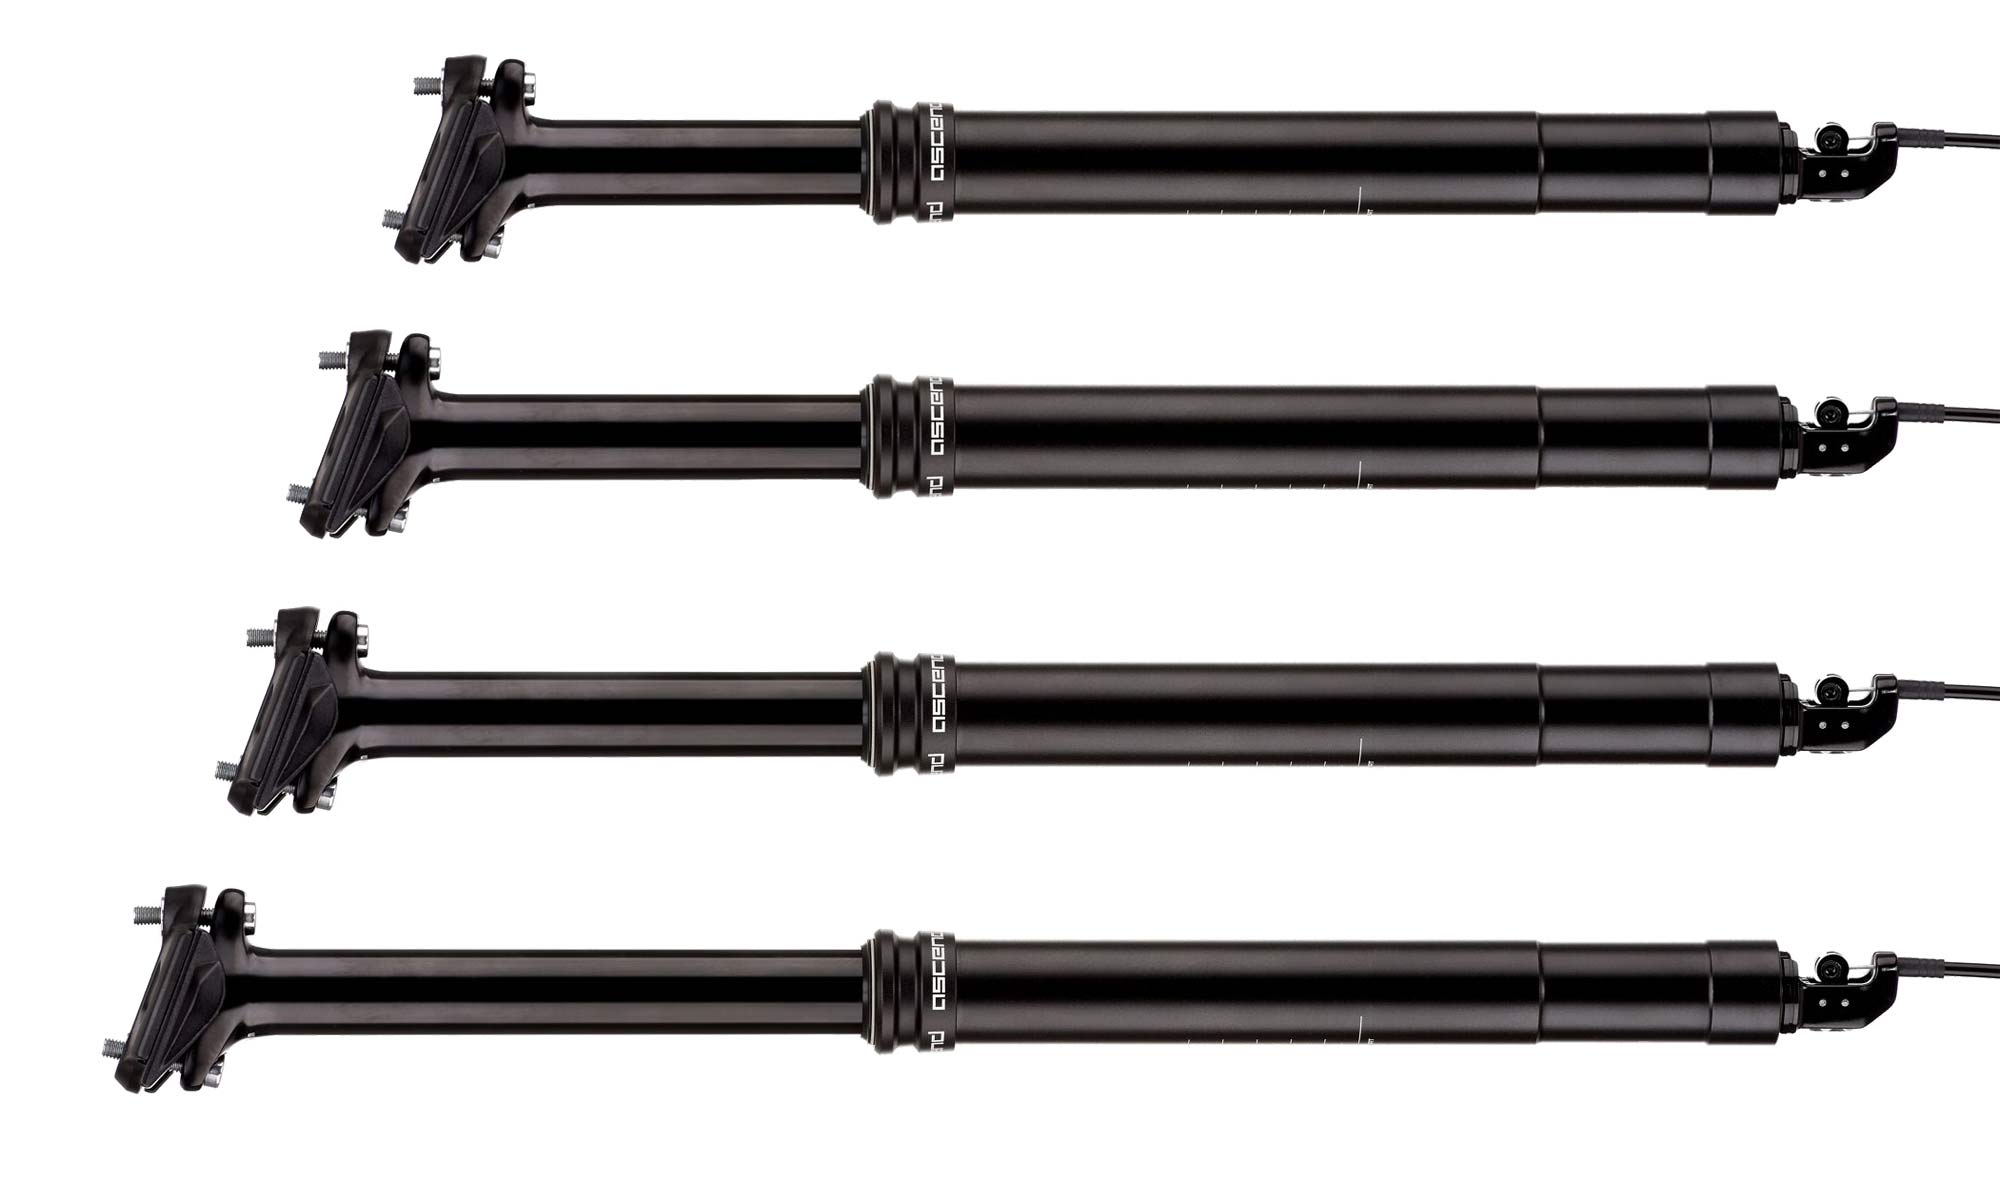 Brand-X supersizes their affordable Ascend dropper posts up to